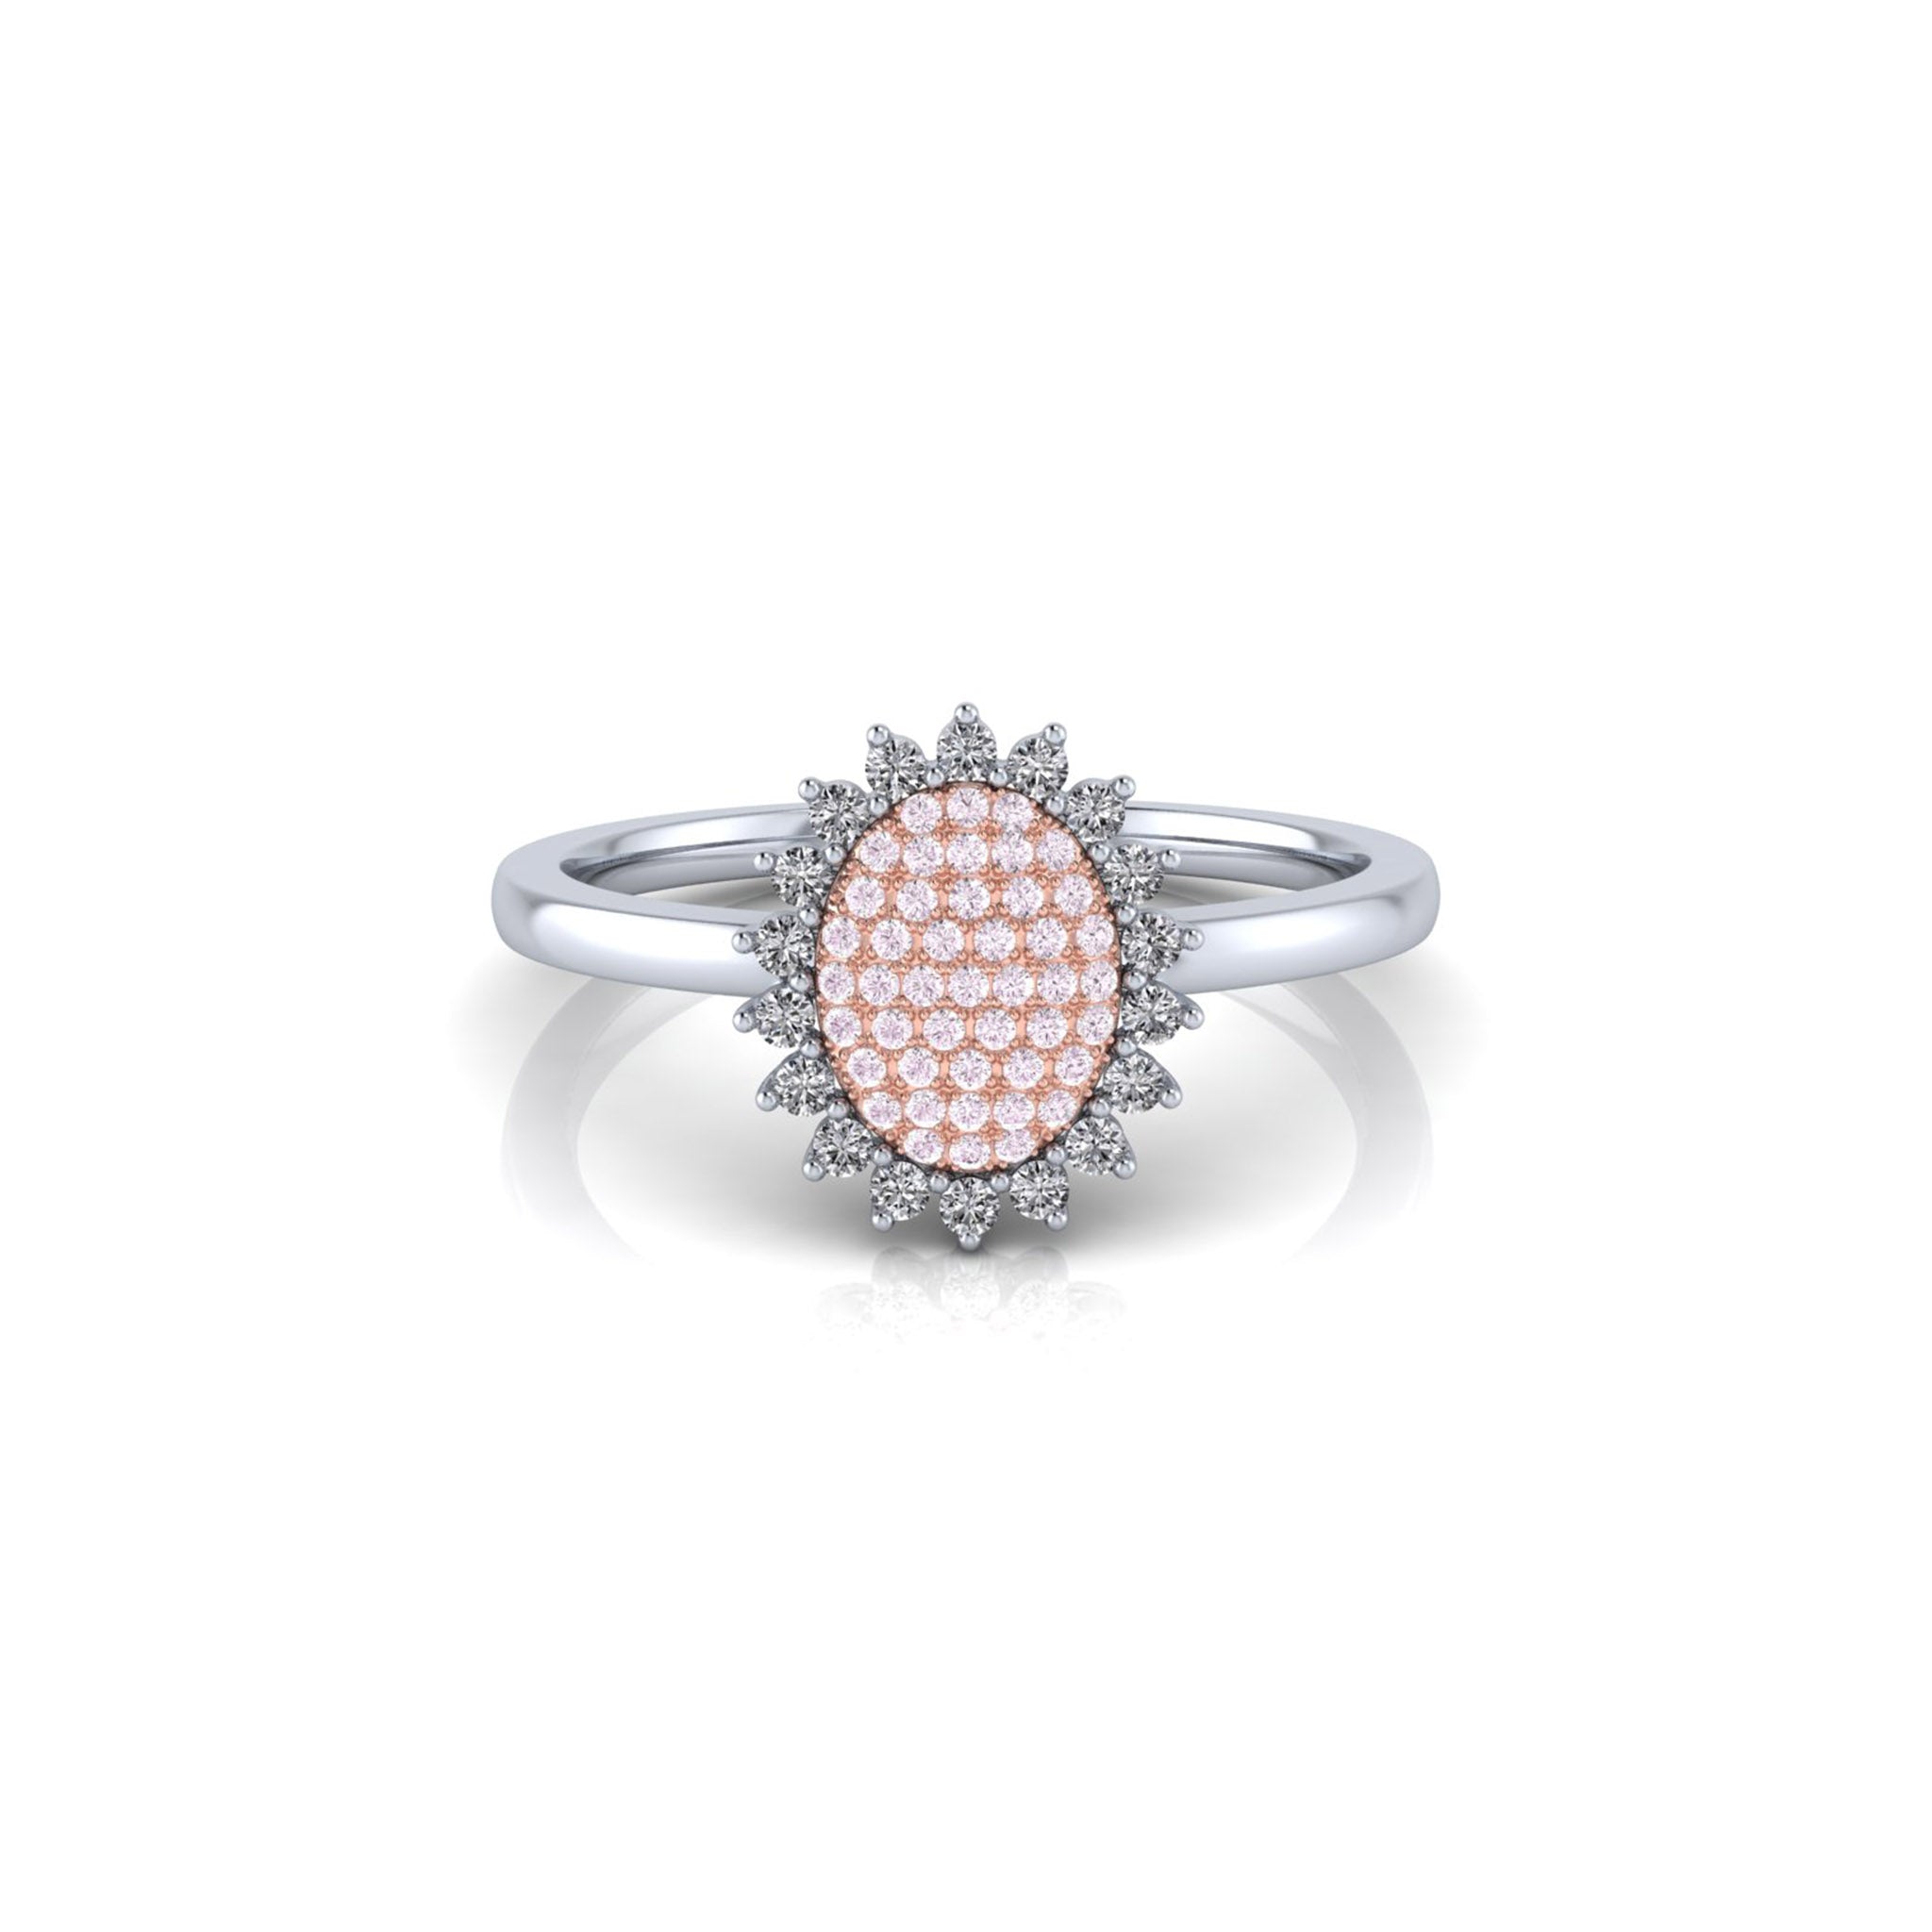 Eminence Pinks Sunflower Oval Pave Ring